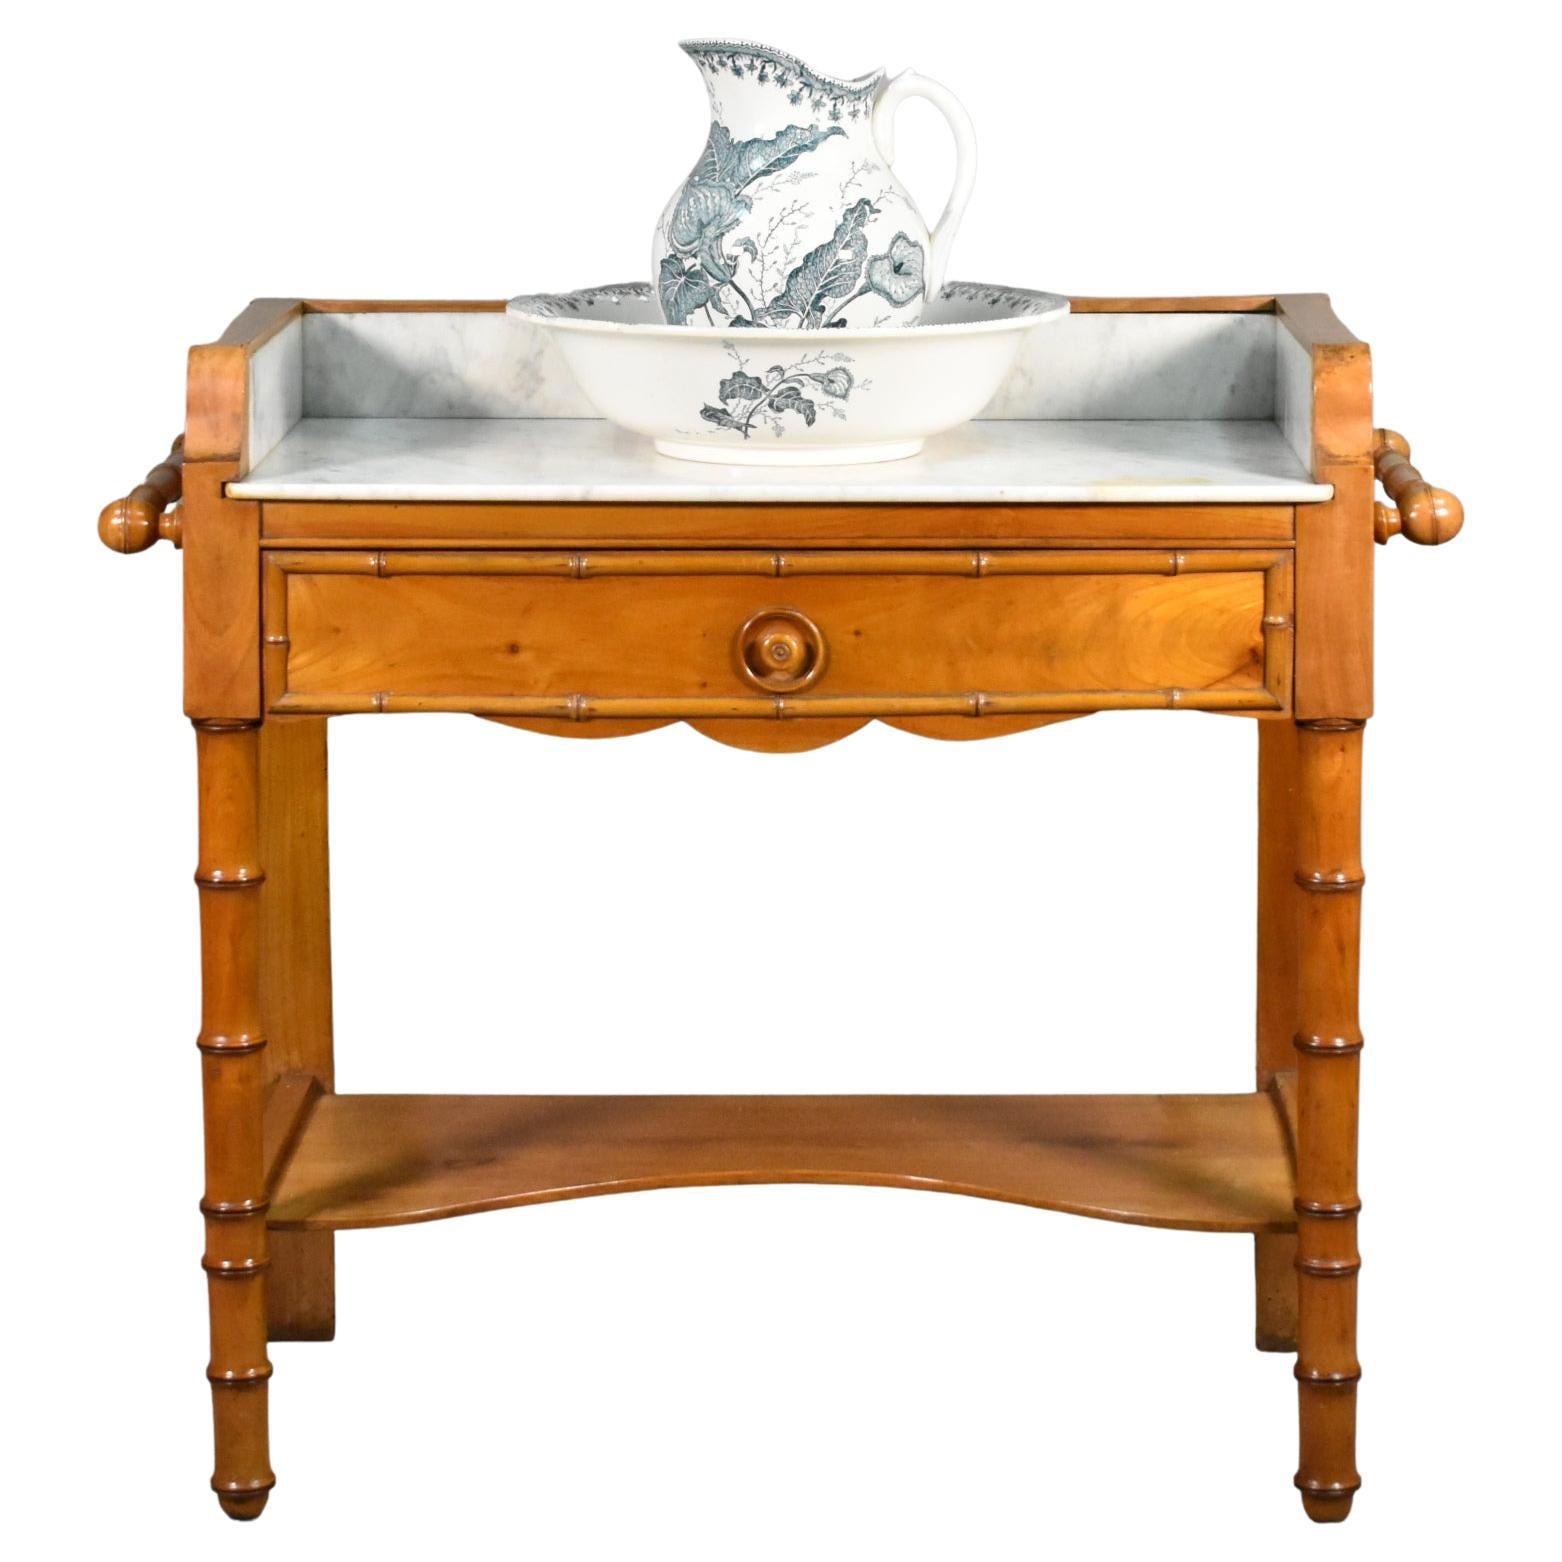 Antique French Washstand in Cherry Wood and Faux Bamboo Louis Philippe Style